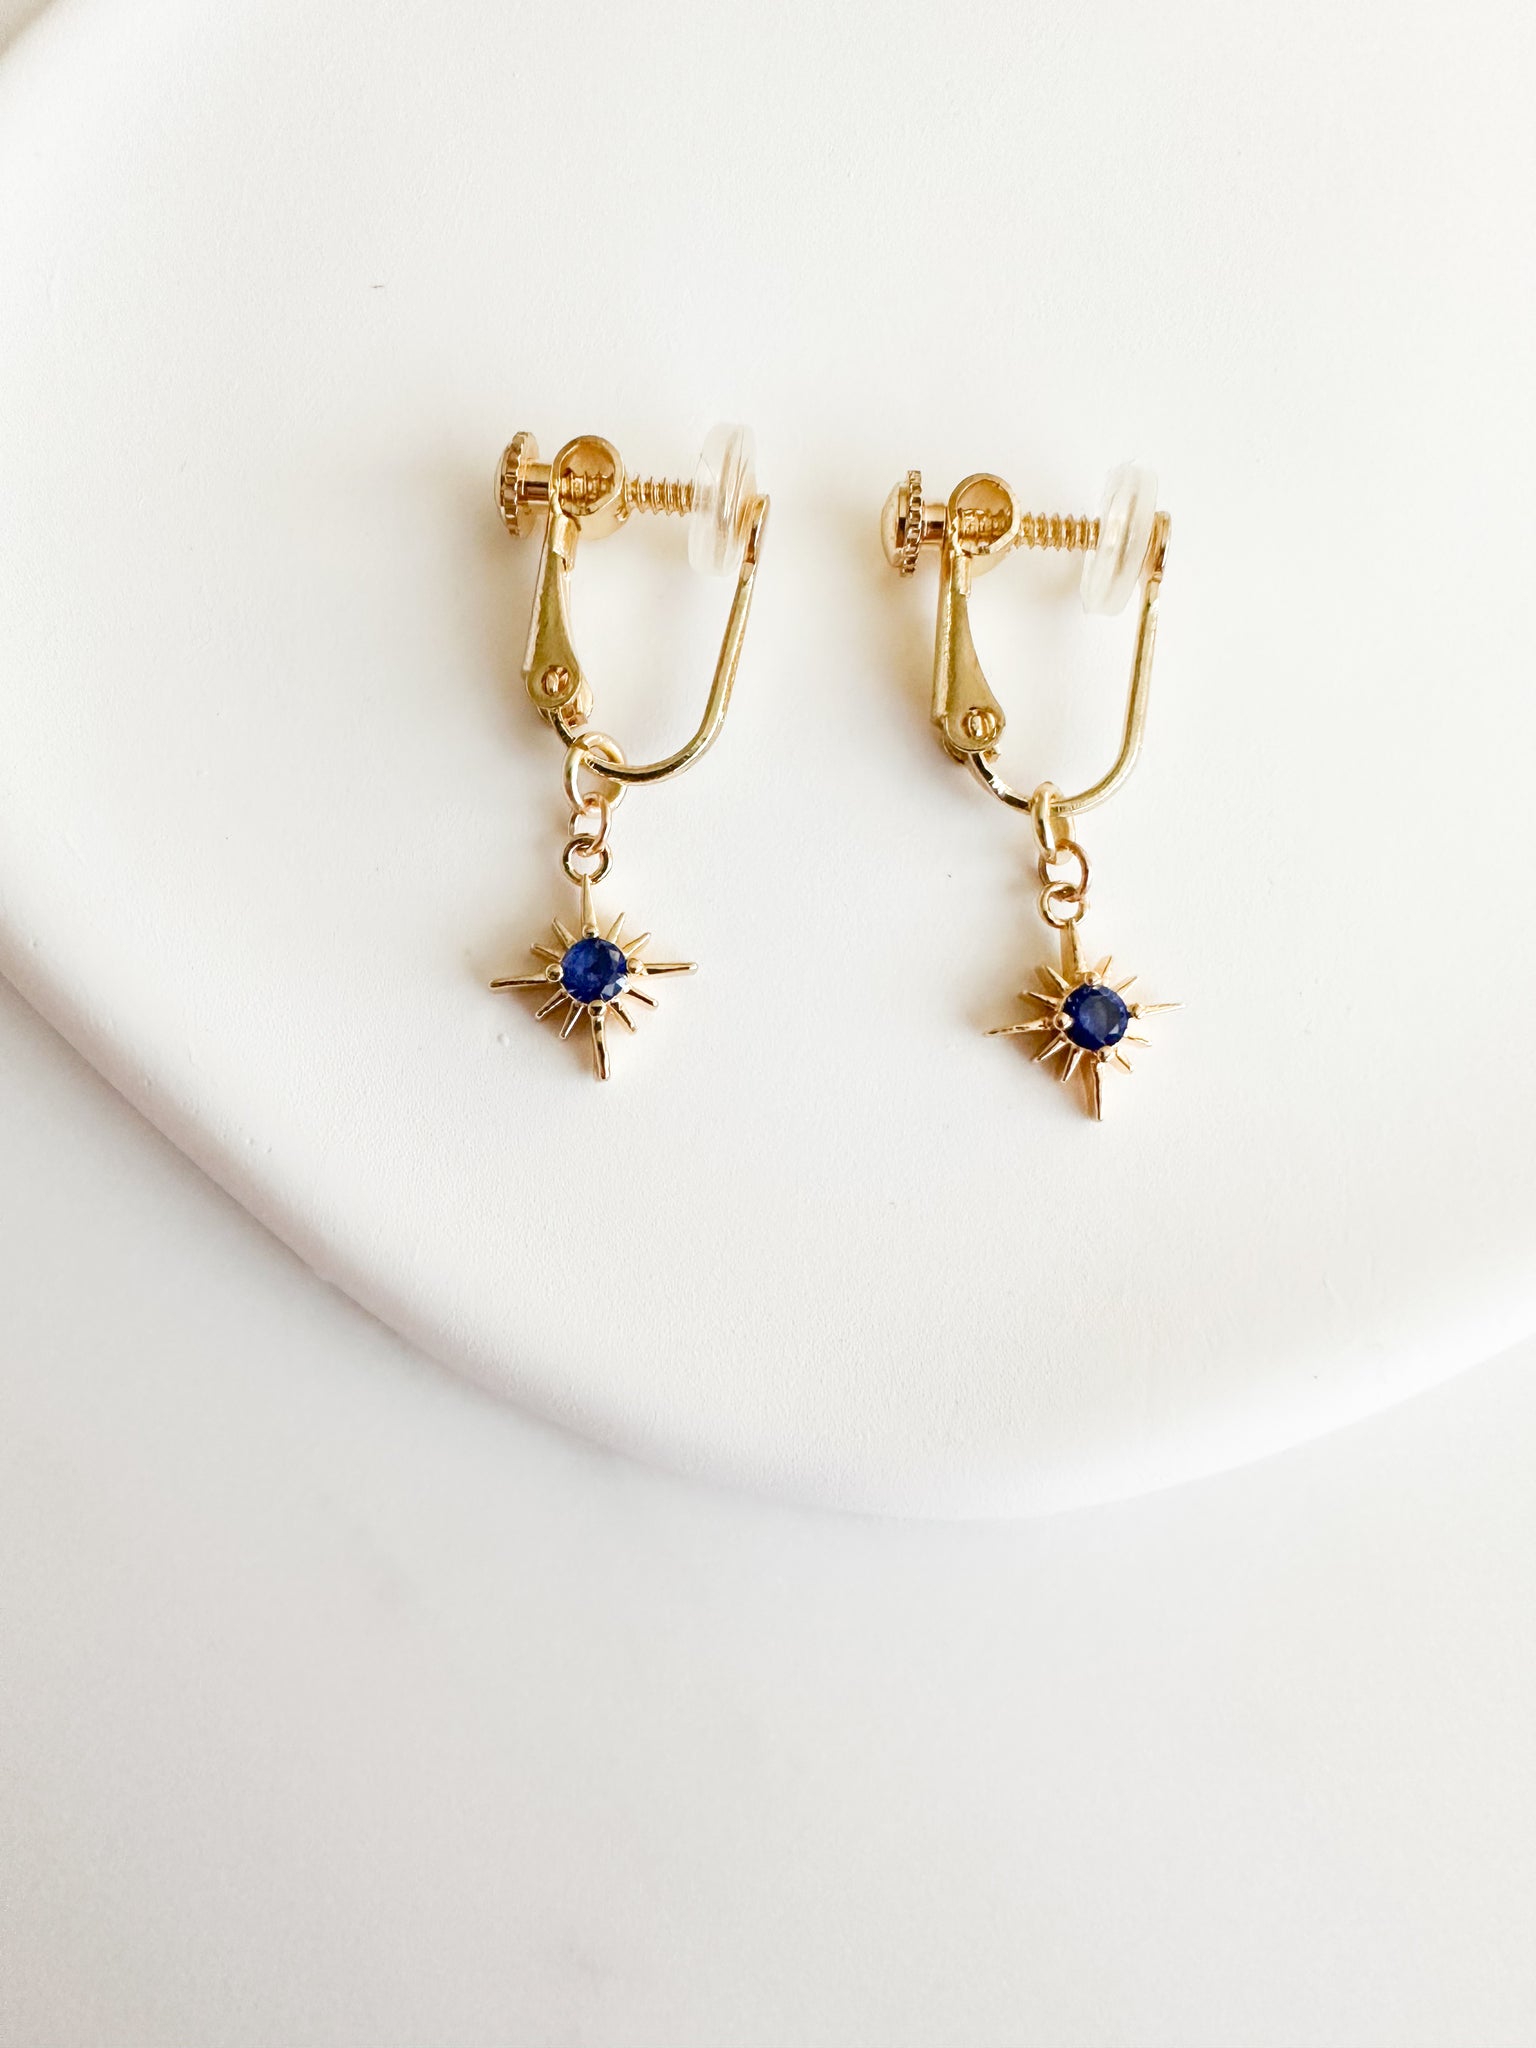 gold screwback clipon earrings with gold constellation charm with dark blue circle gem in middle